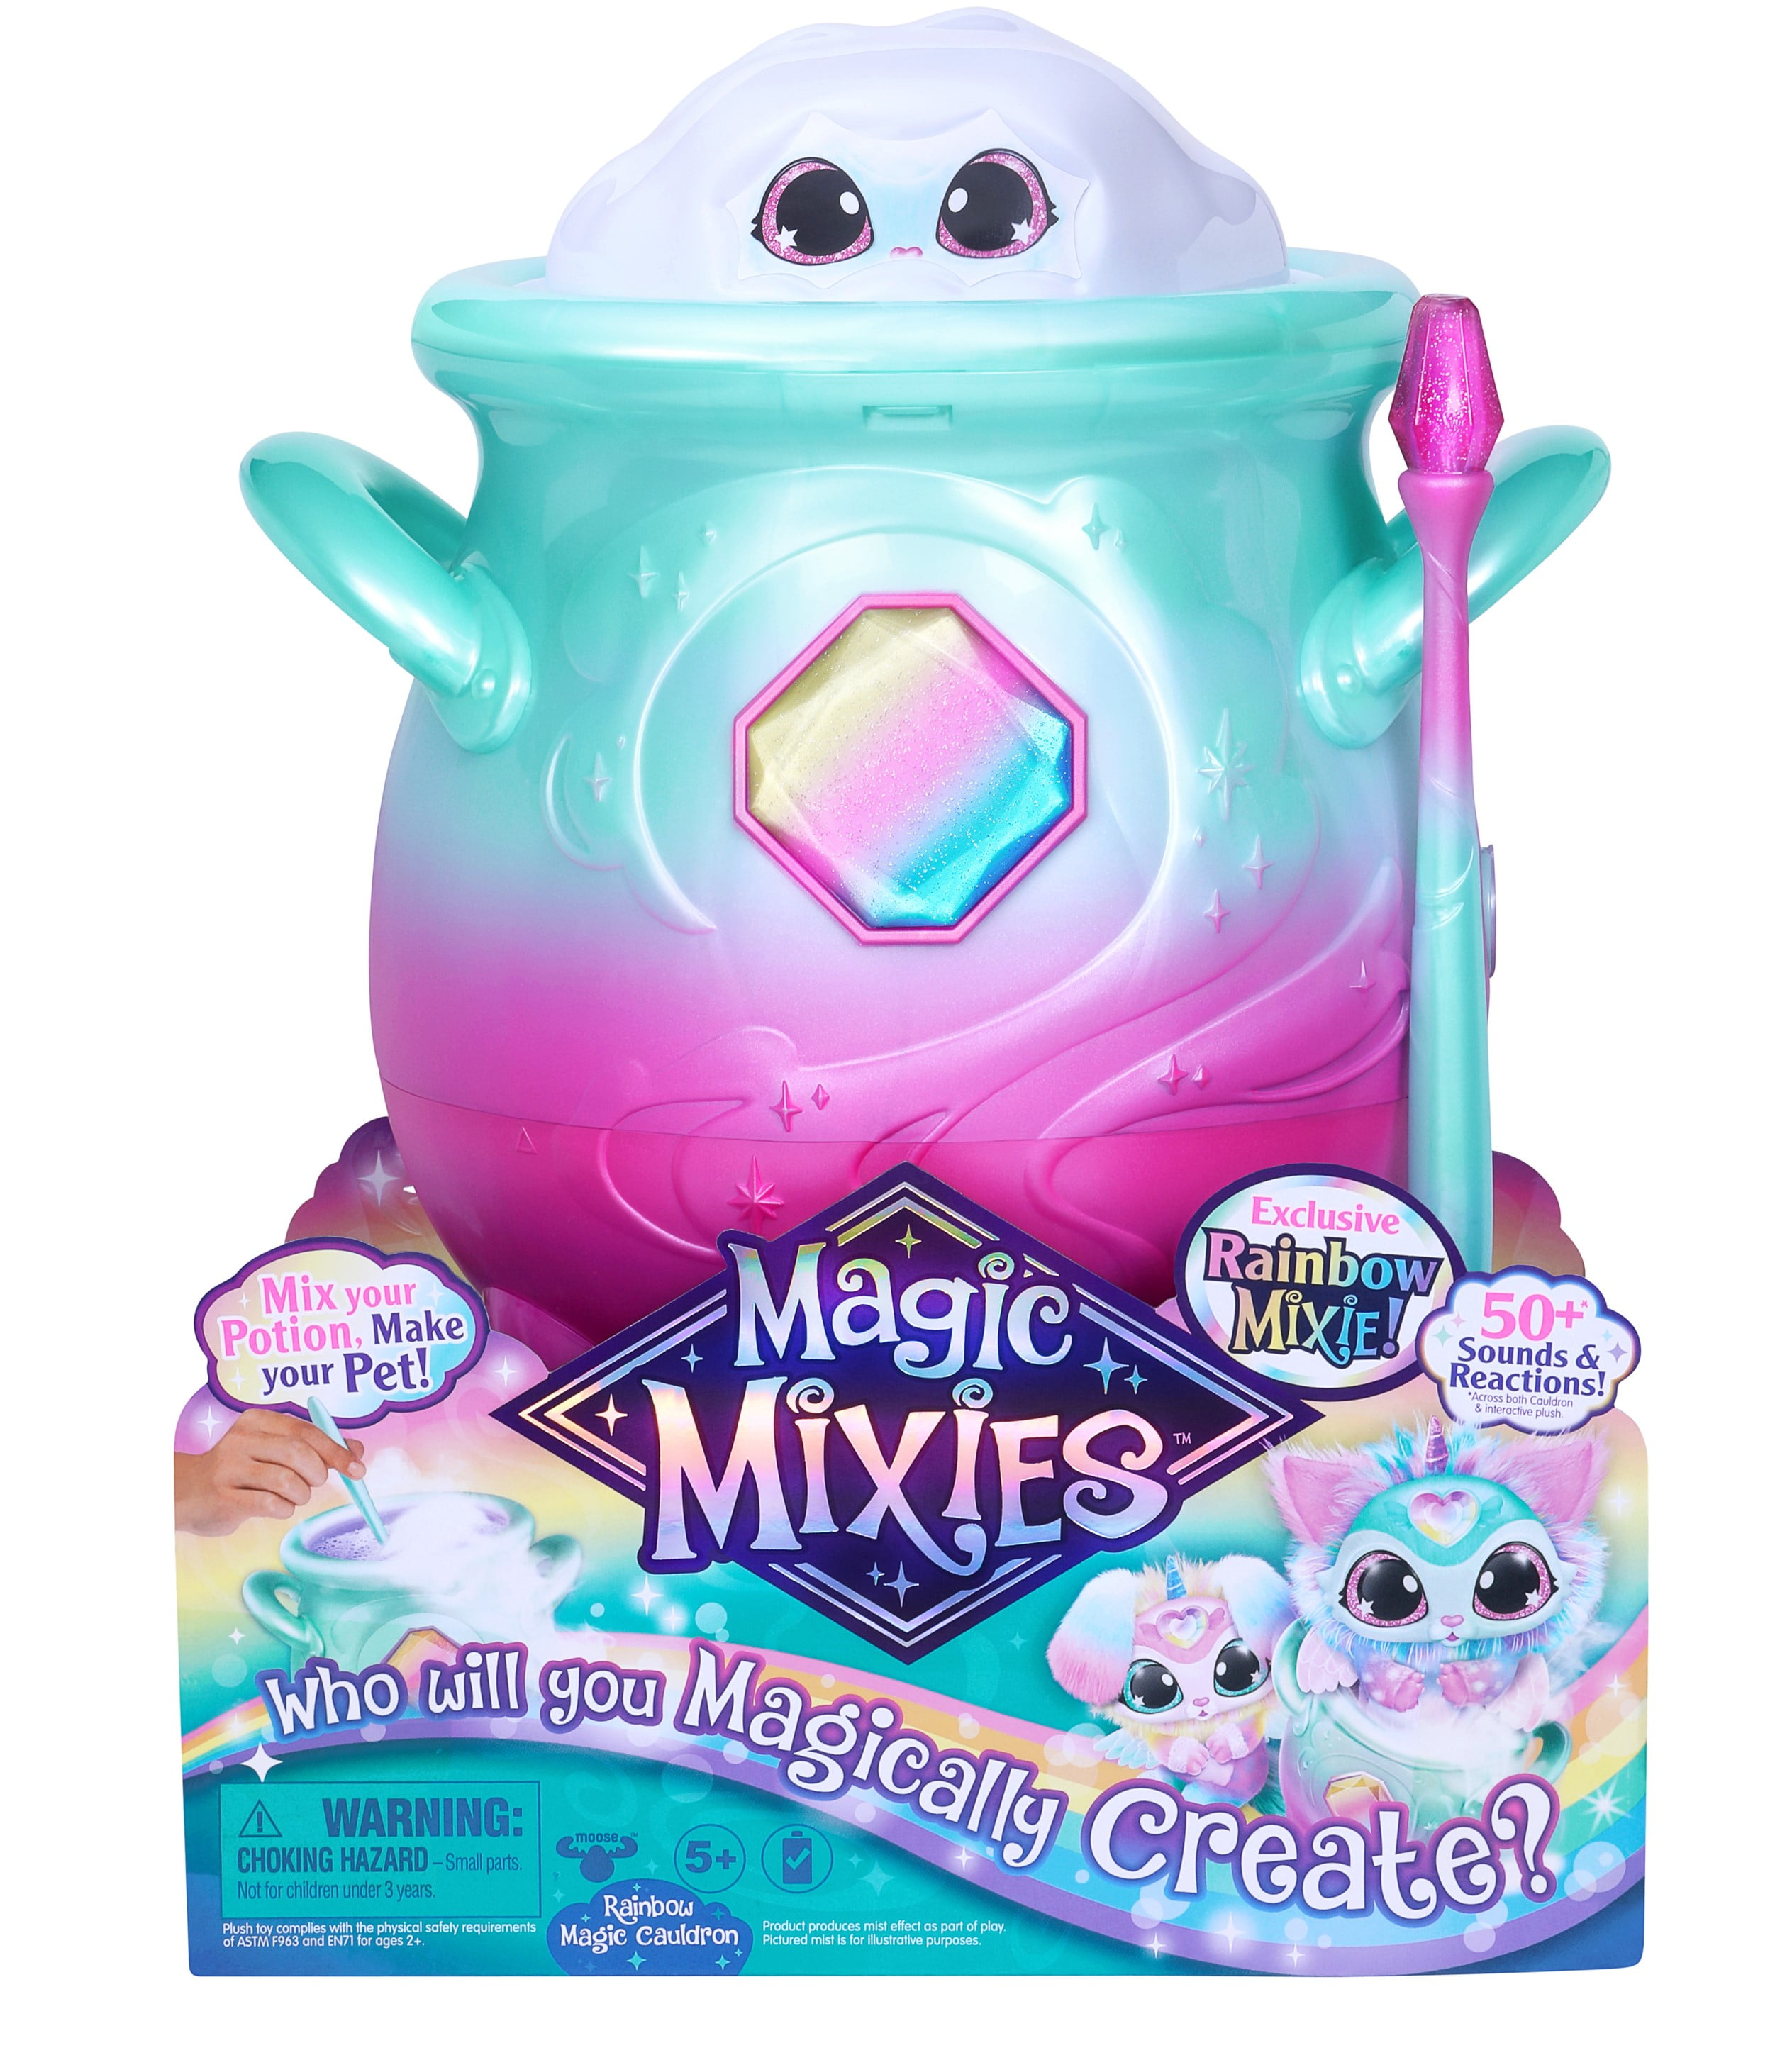 Magic Mixies Magical Misting Cauldron with Interactive 8 inch Blue Plush  Toy and 50+ Sounds and Reactions, Multicolor